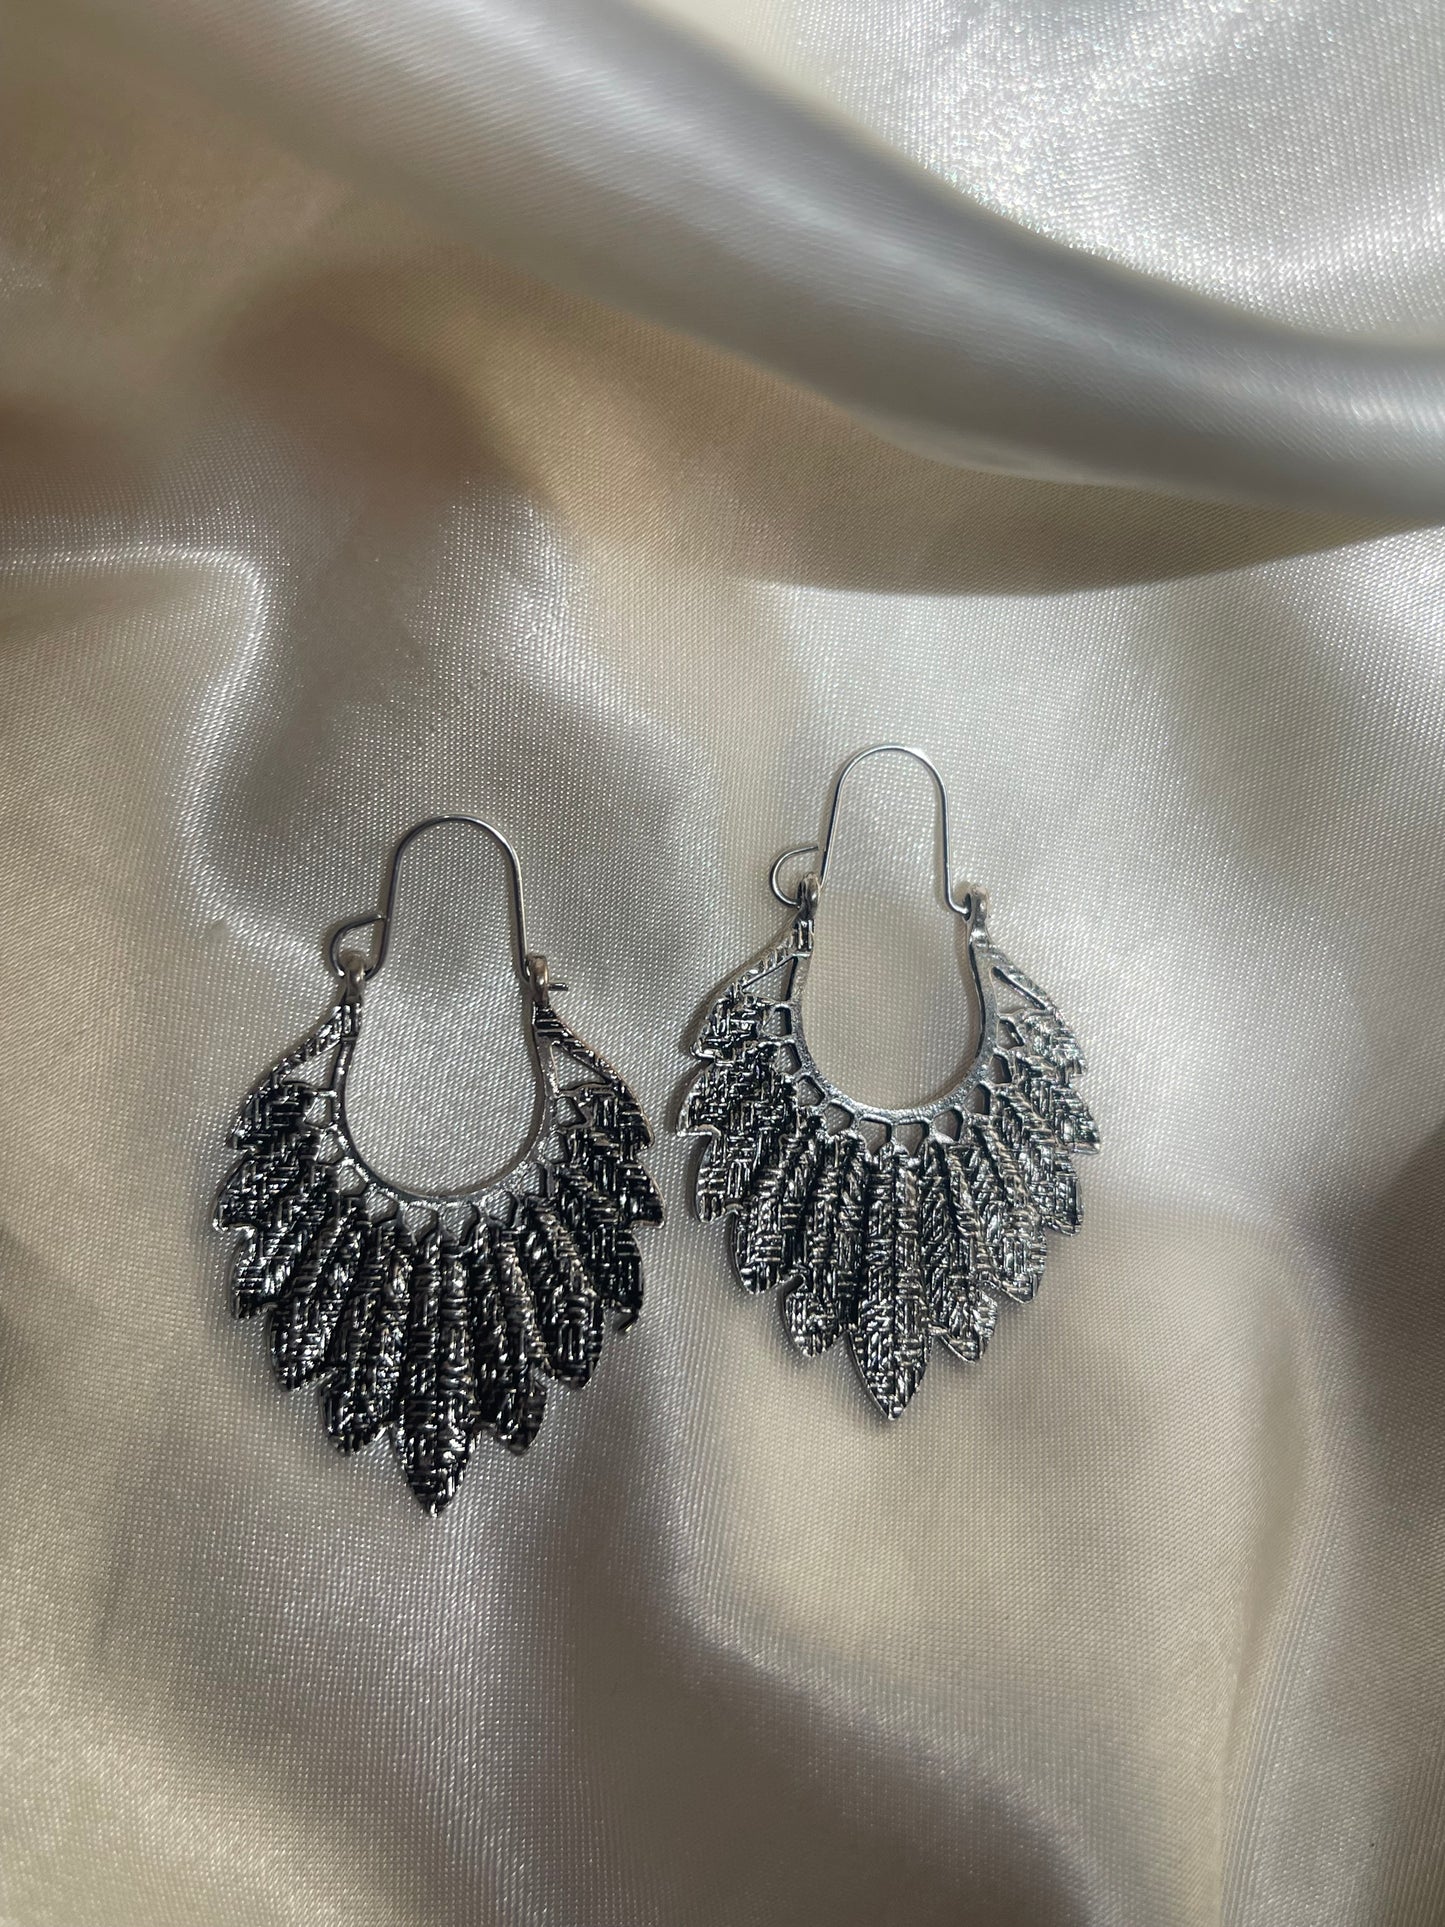 Silver Feathered Statement Earrings